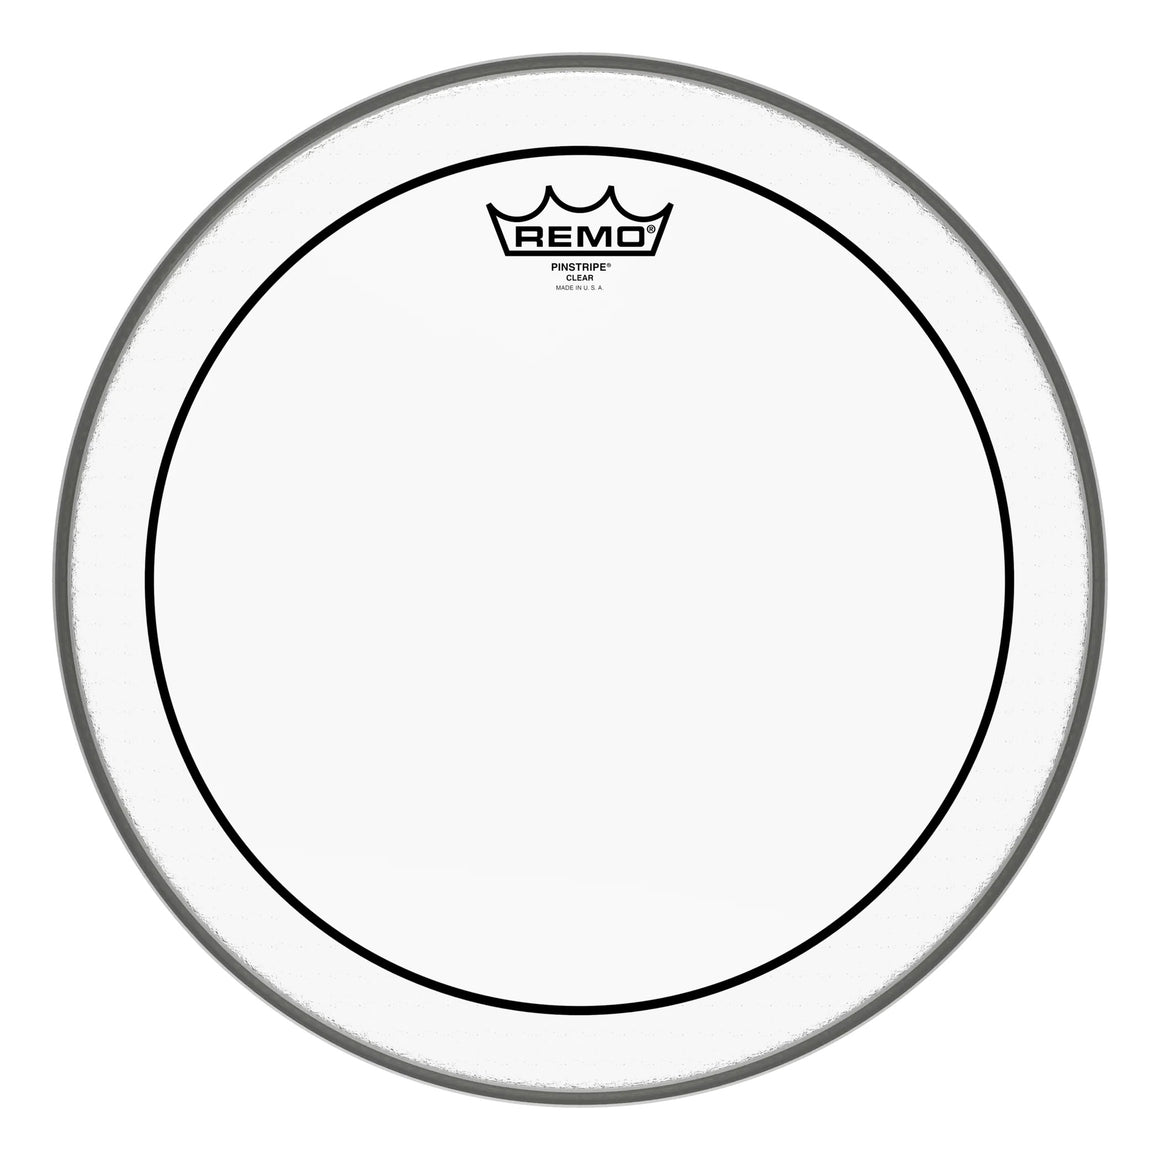 REMO PS031000 10" Clear Pinstripe Drum Head